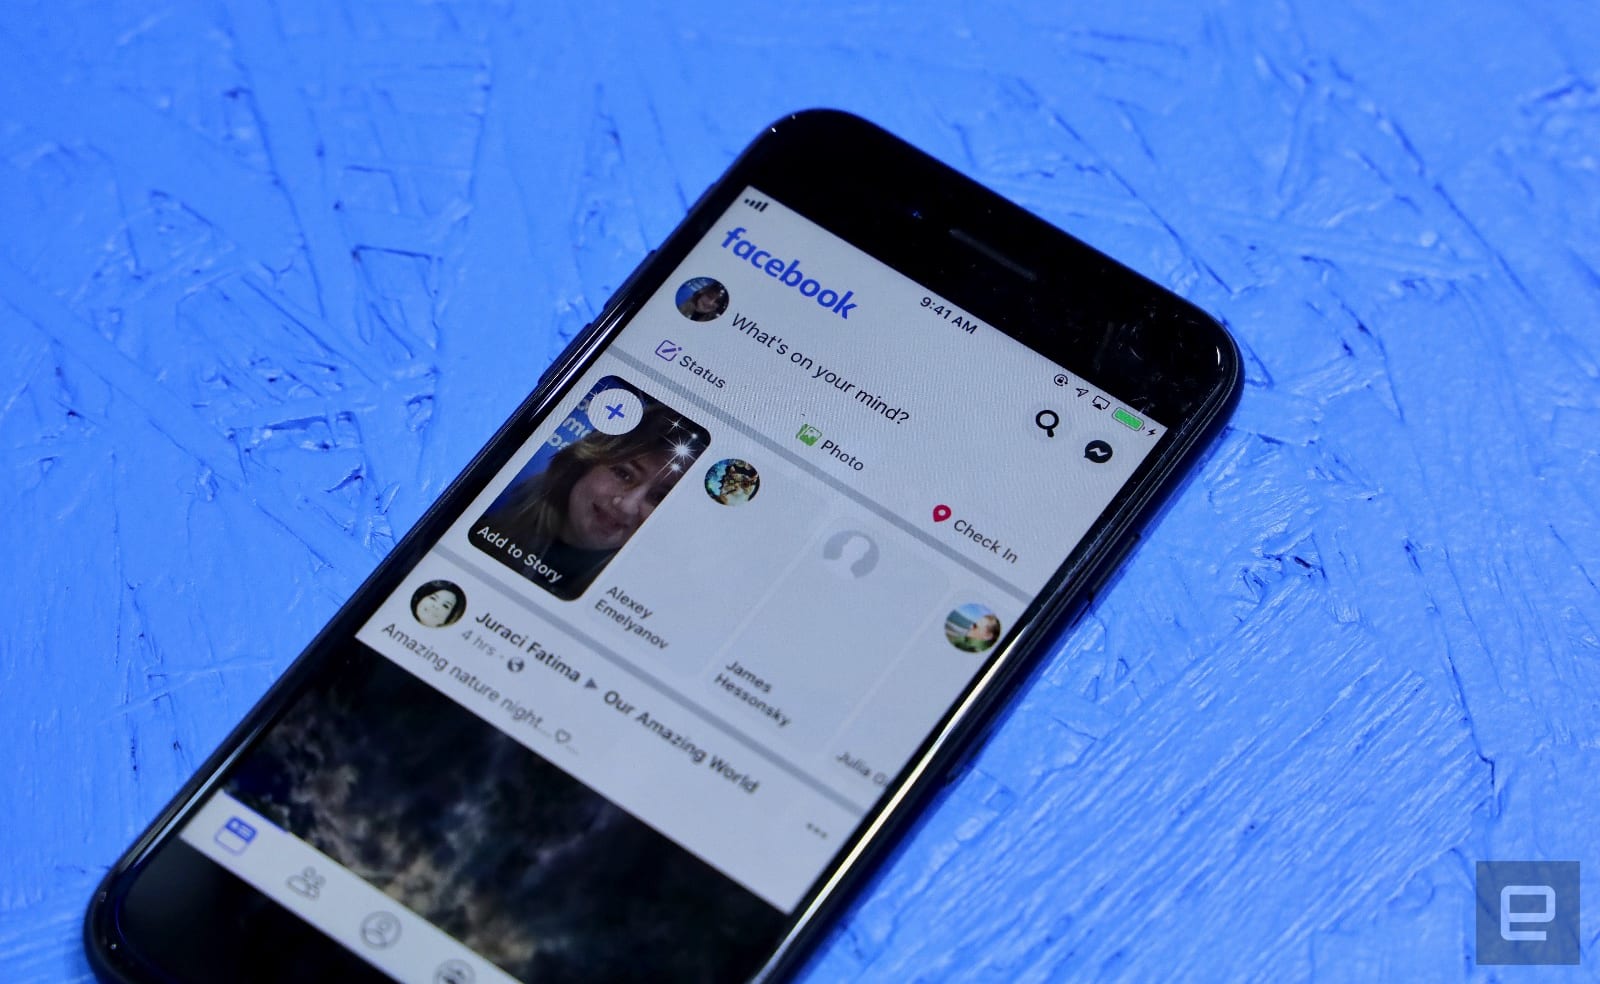 A closer look at the redesigned Facebook app.